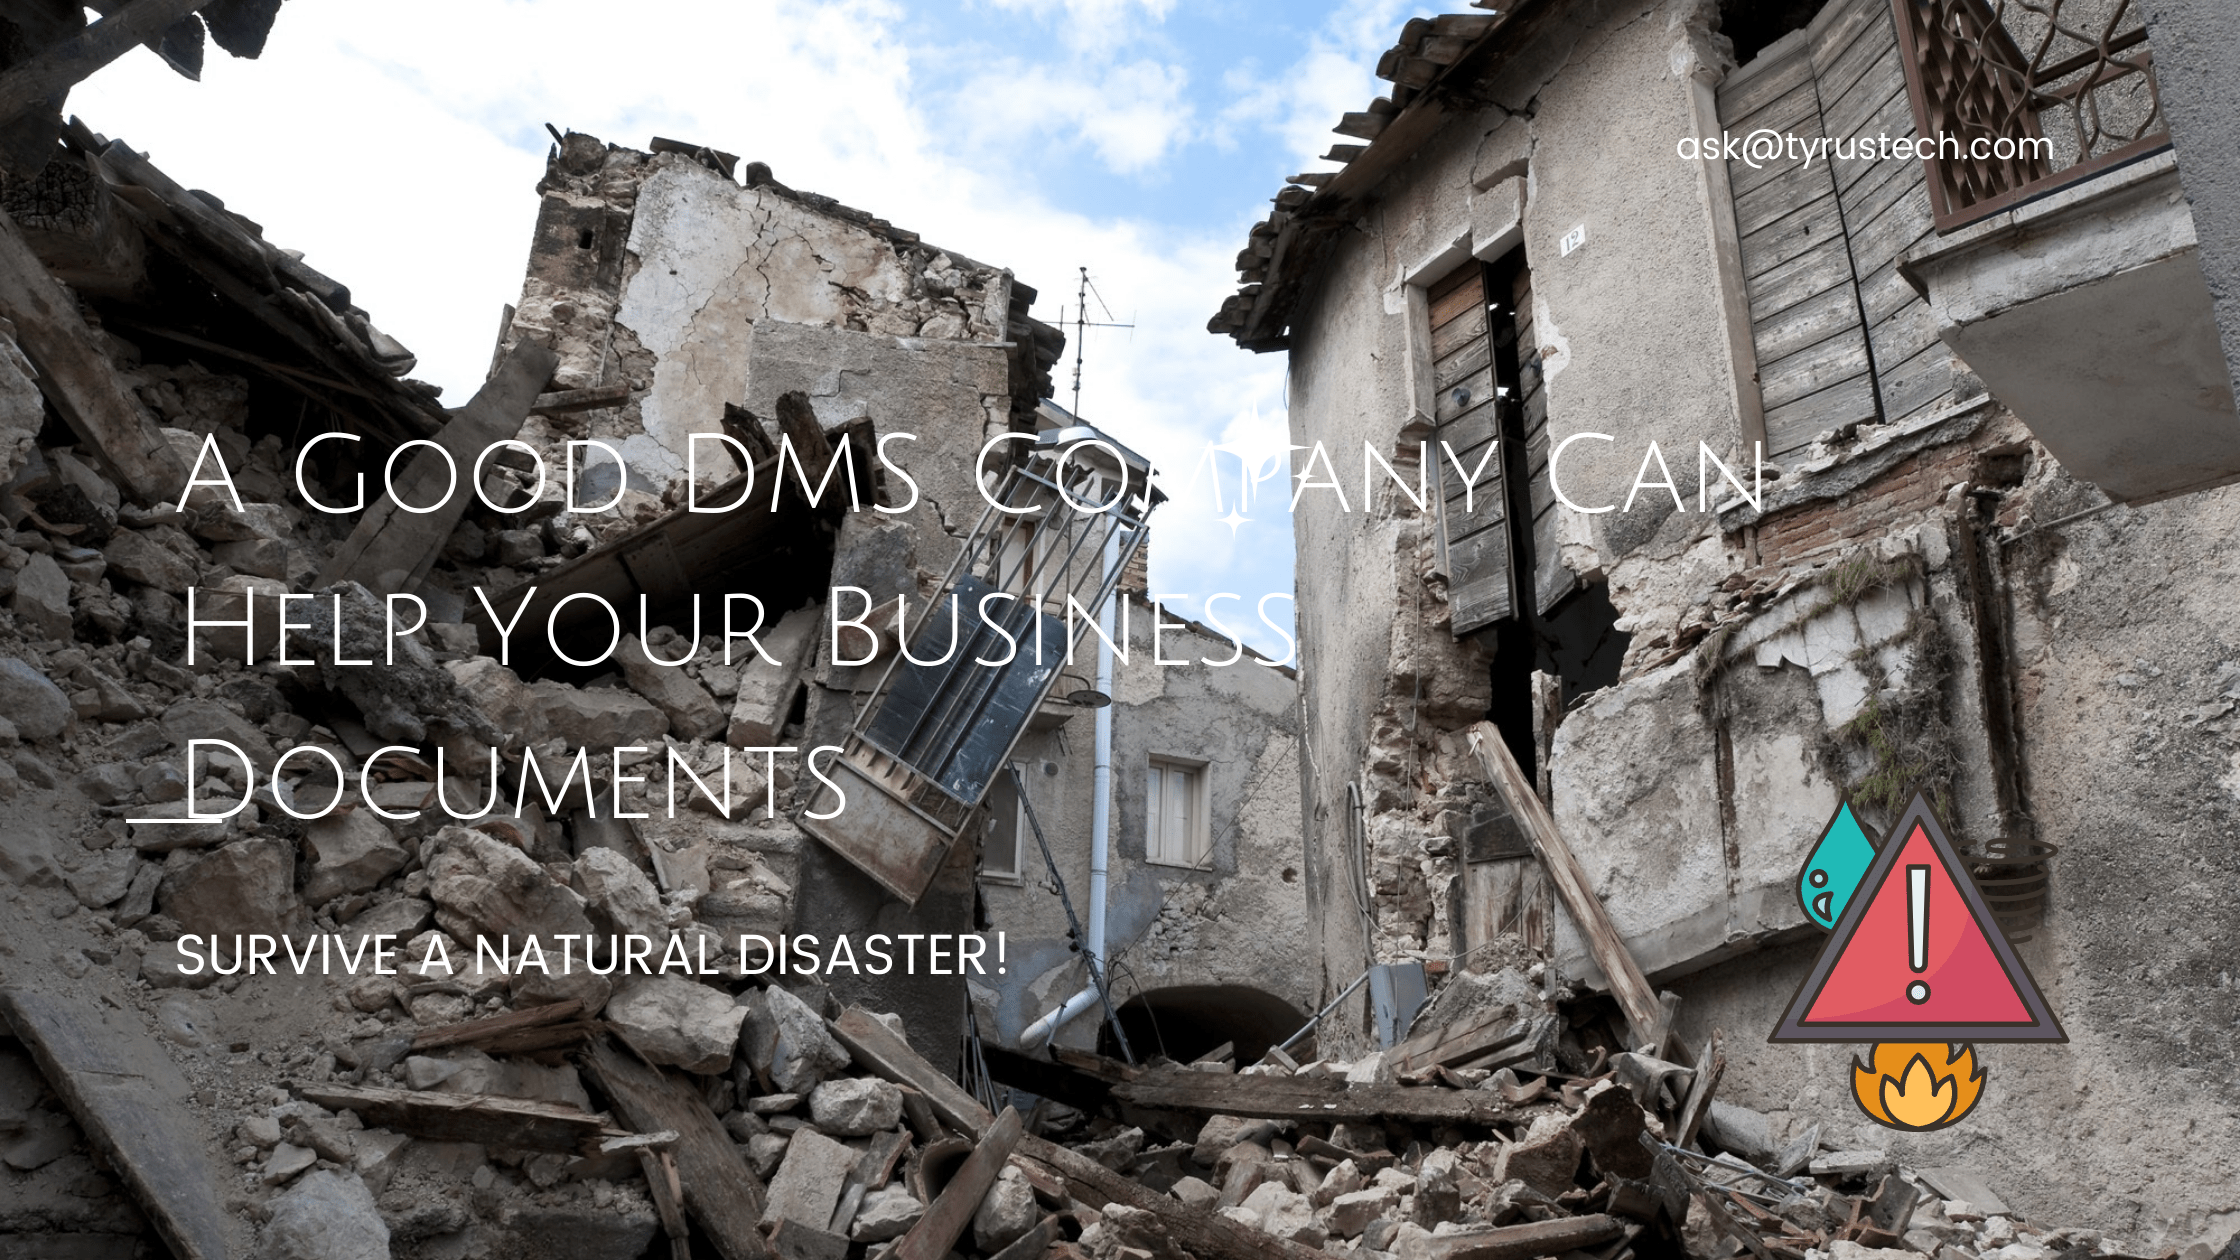 Business Documents Survive a Natural Disaster